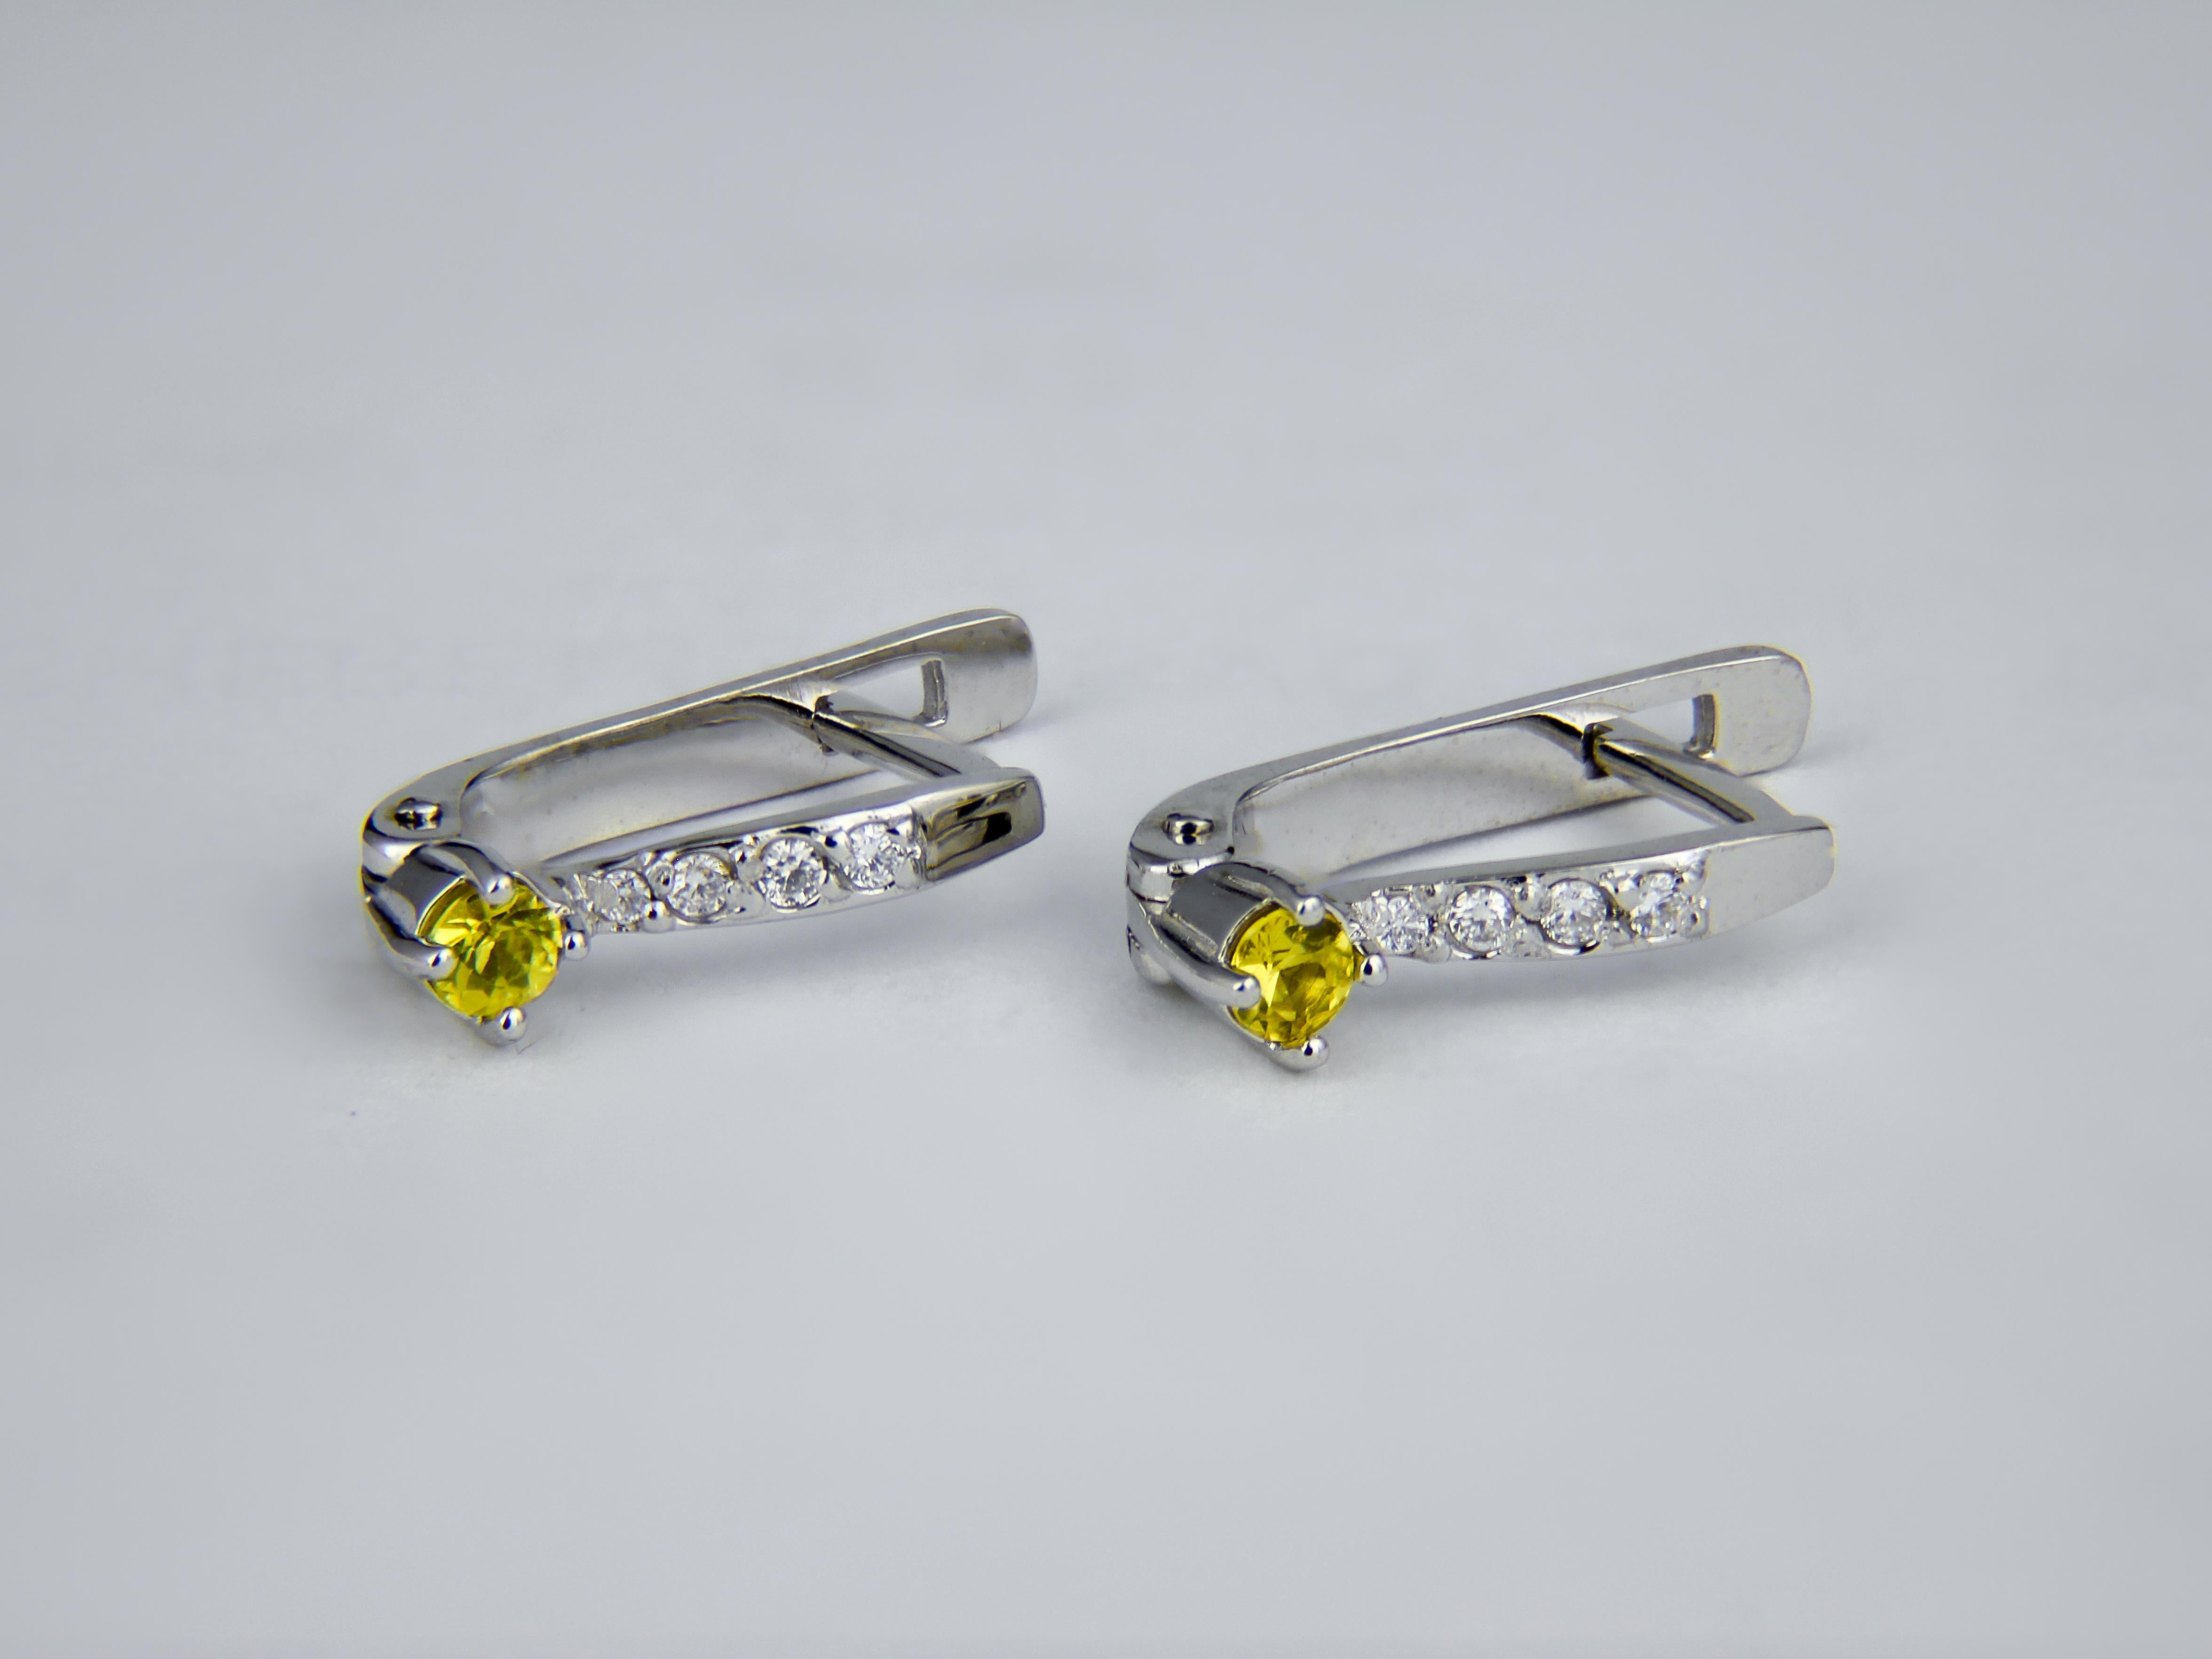 Sapphire gold earrings. 
Tiny yellow sapphire earrings. Gold earrings for girl. Delicate sapphire earrings. Earrings With Sapphire, Diamonds.

Total weight: 2 g. 
Gold - 14k gold
Size: 16.4 x 3.65 mm. 

Central stones: sapphires 
Cut: Round 
Total